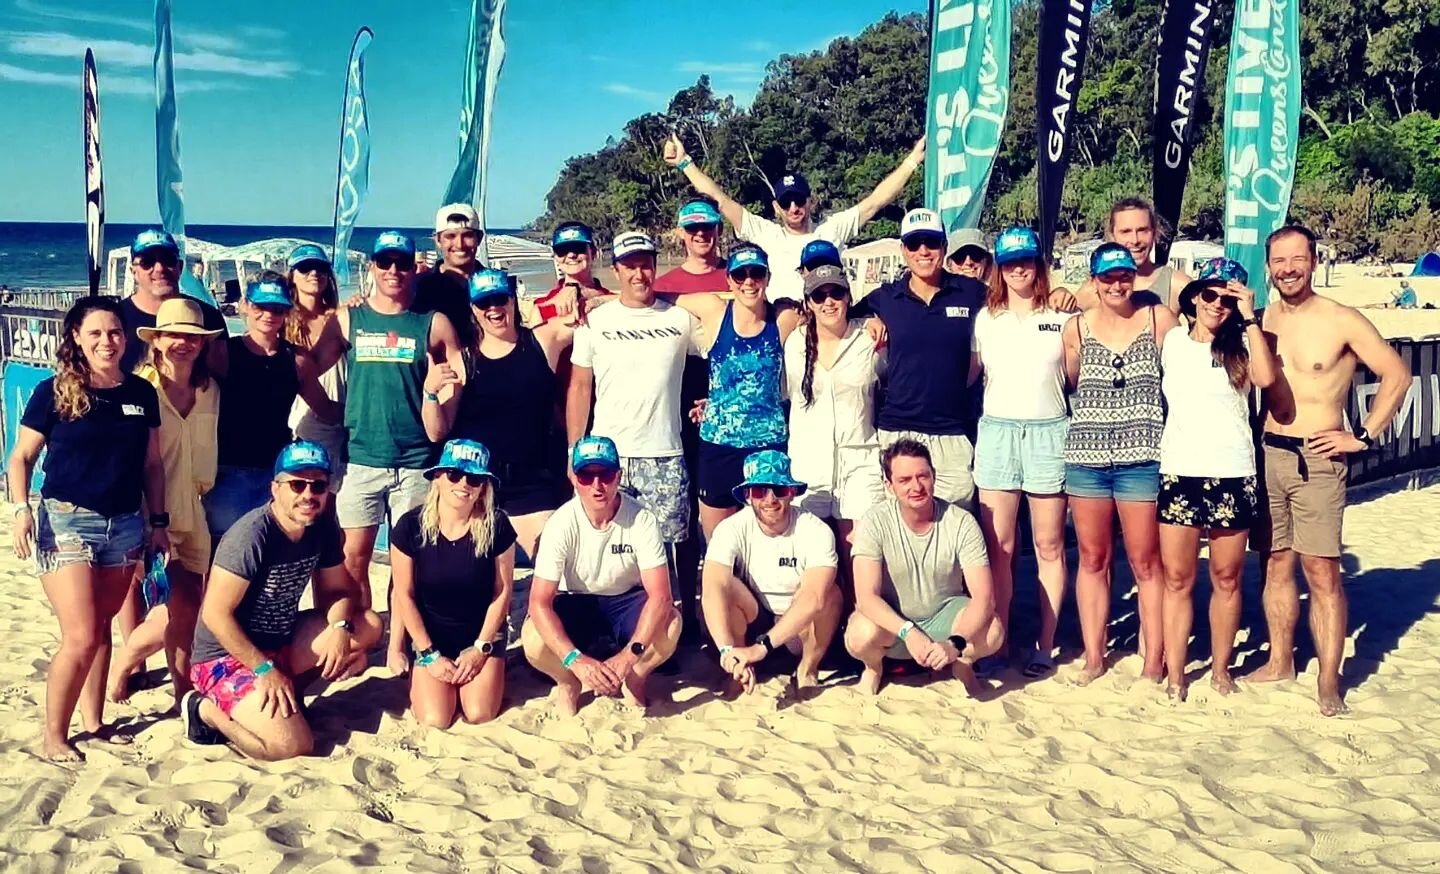 Noosa triathlon we are ready for you! The BRAT family shot on the iconic beach which will host thousands of triathletes tomorrow morning. Good luck!